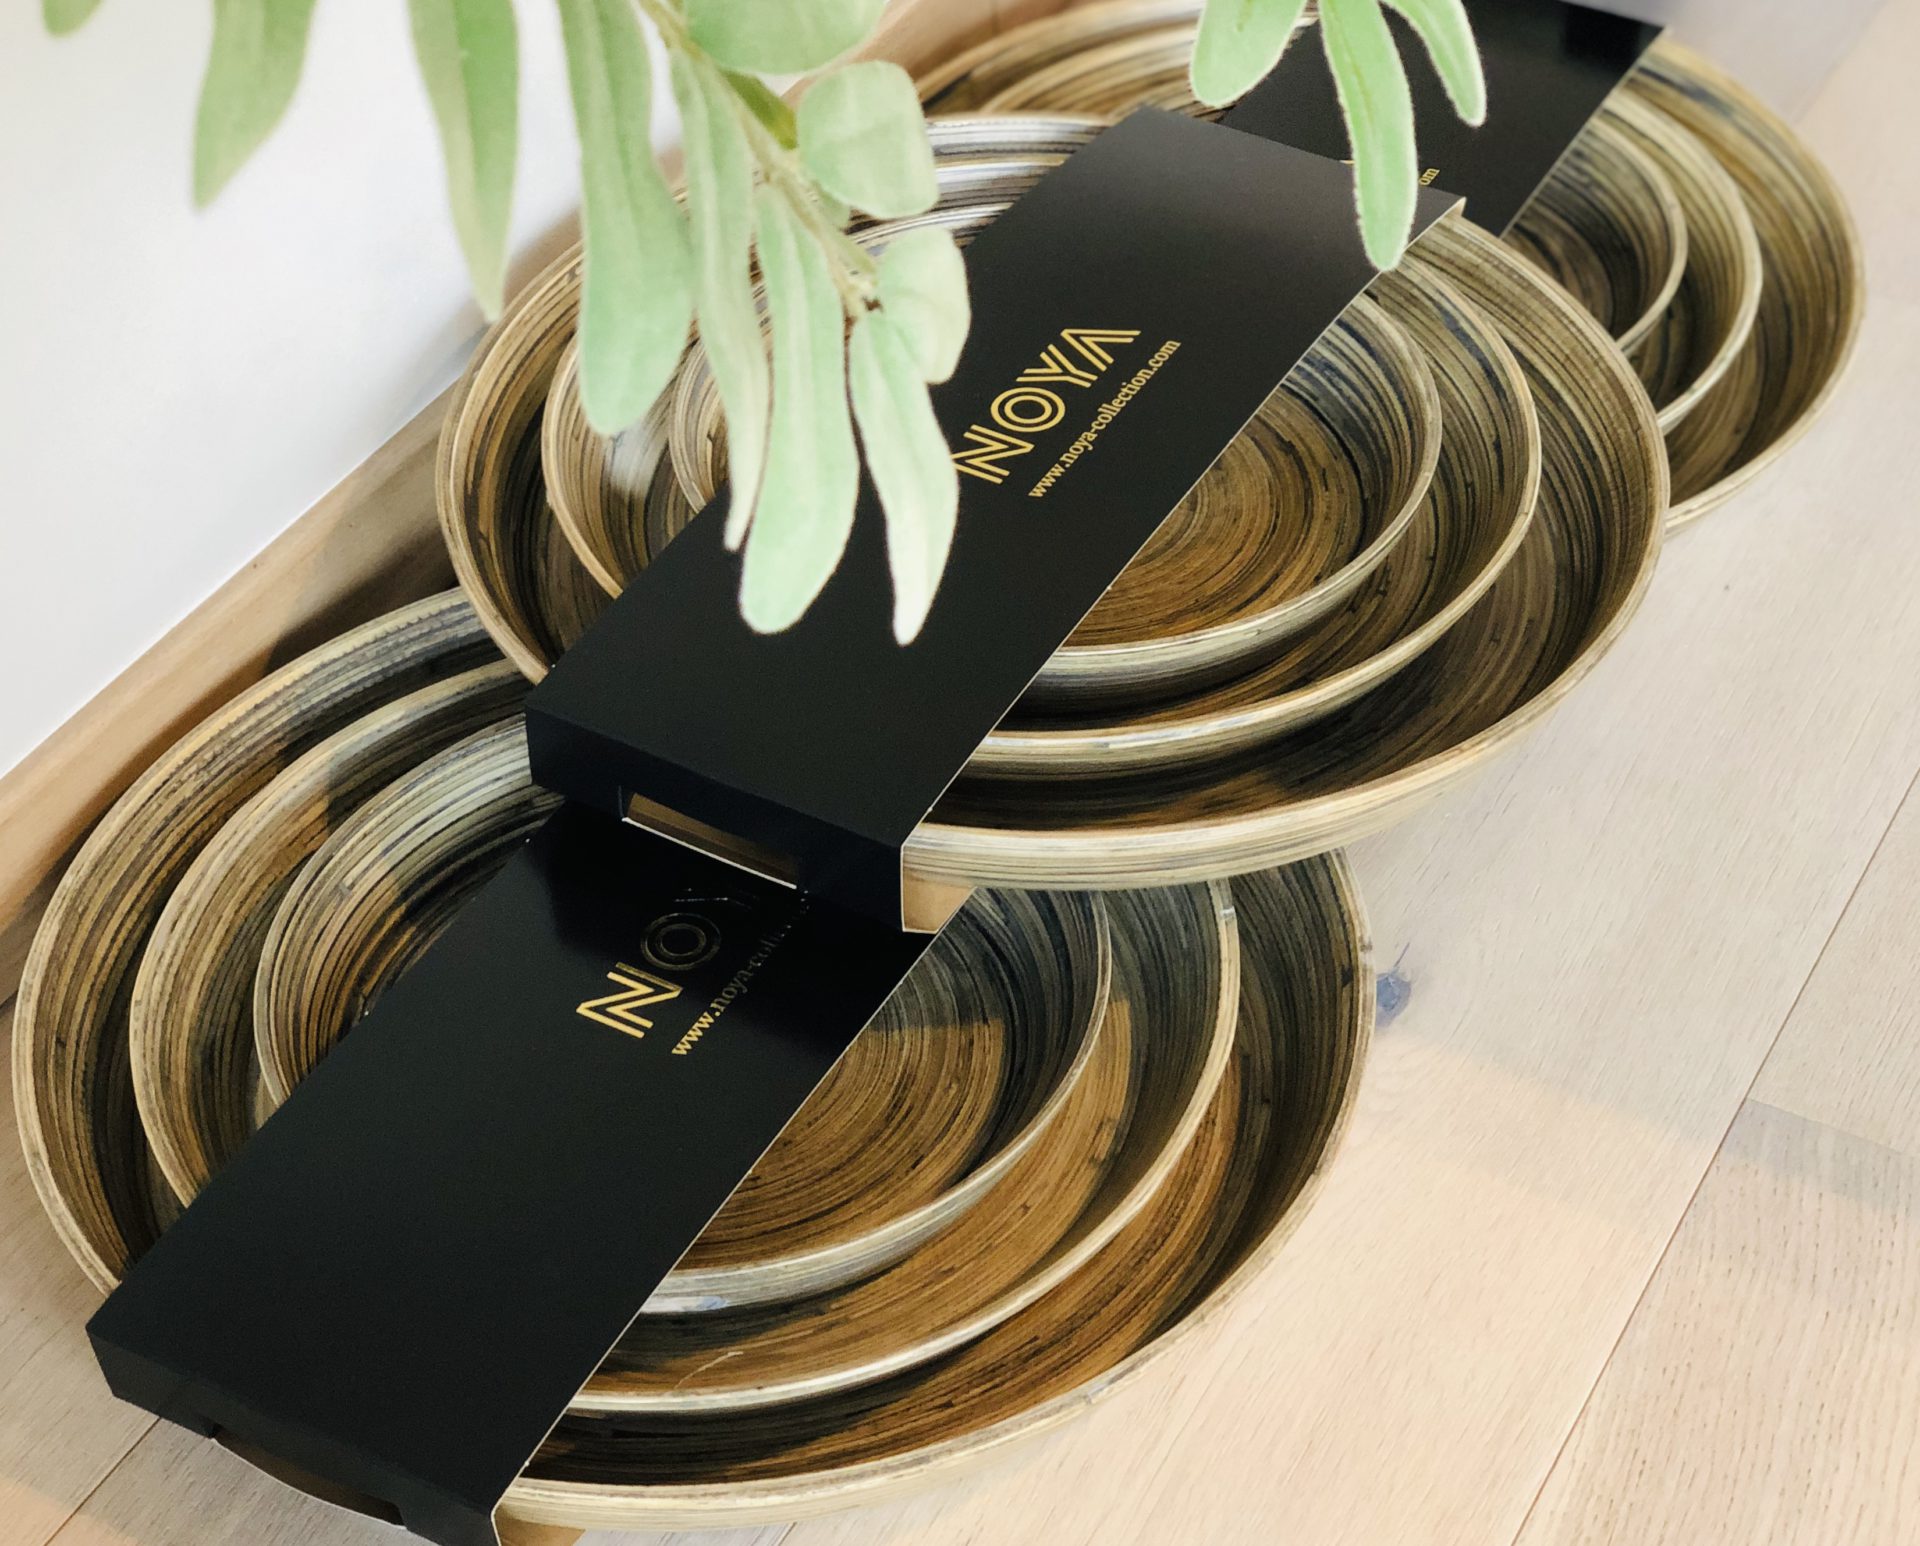 Our new beauties have arrived!! Exclusive serve ware in sandblasted bamboo